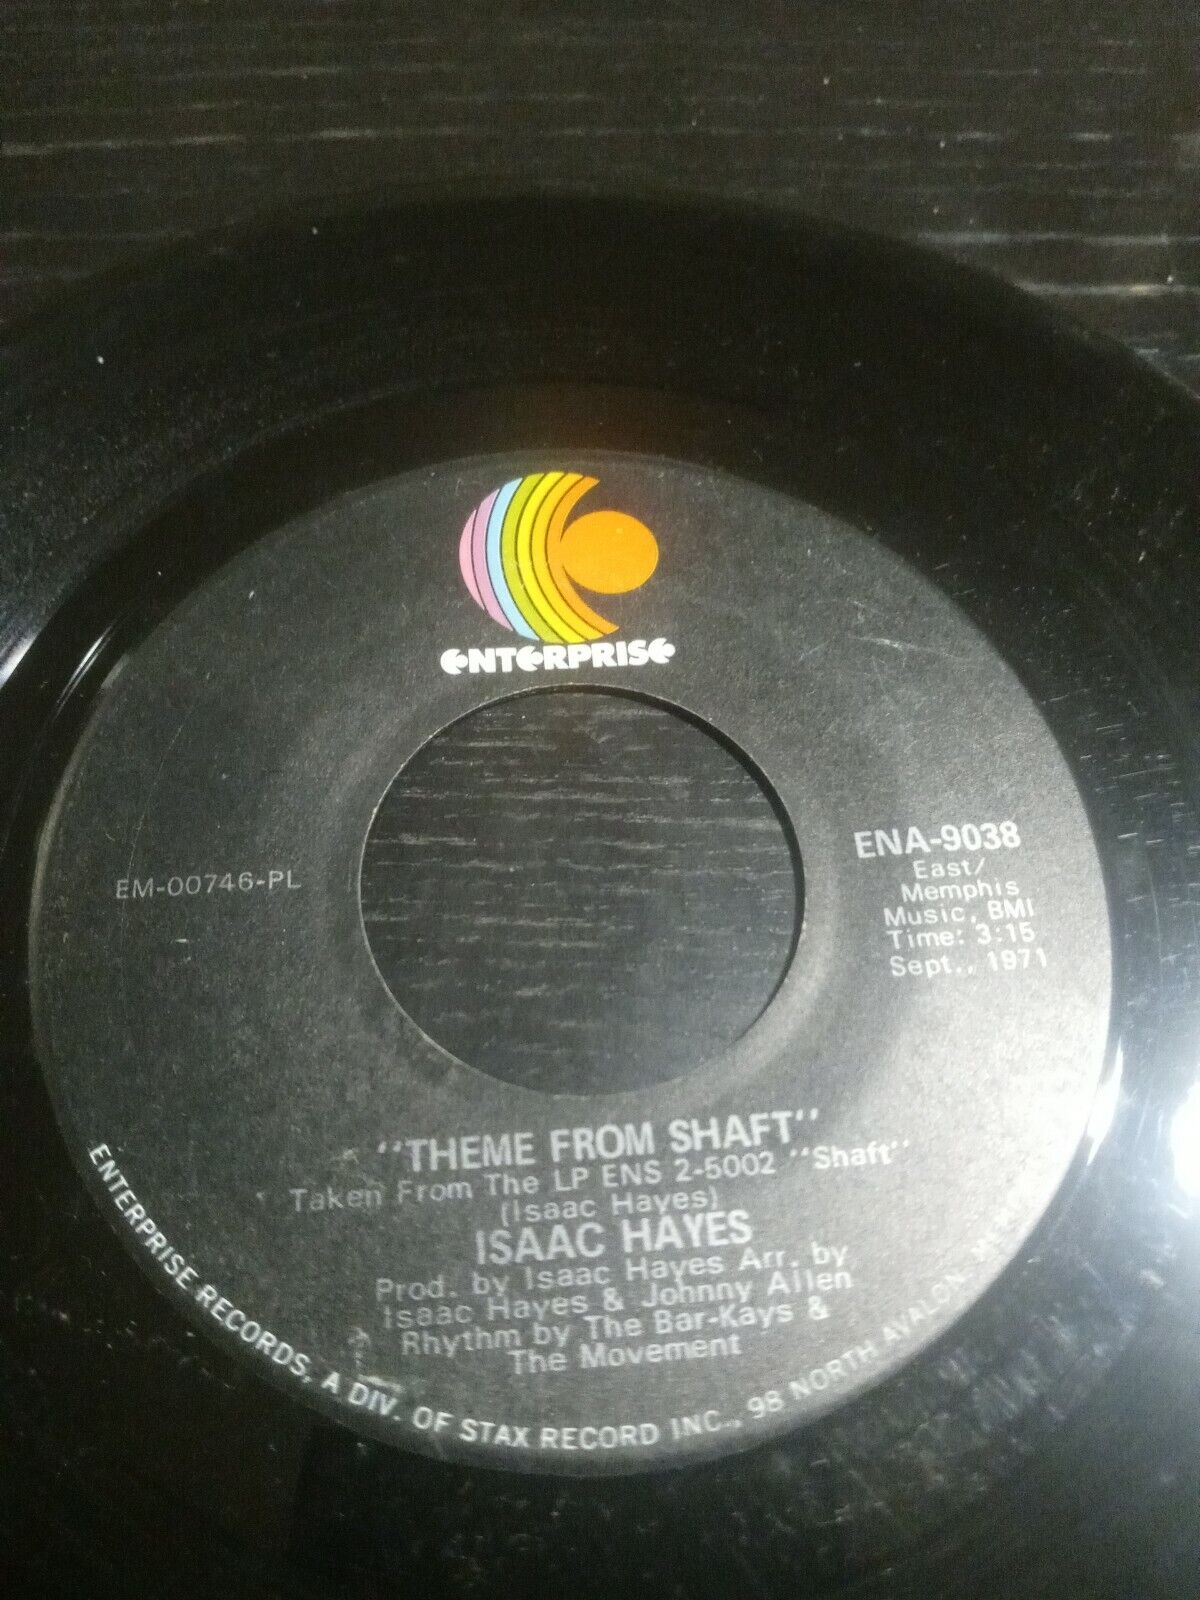 Isaac Hayes quot;Cafe Regio's/Theme From Shaftquot; - 7quot; - Northern Soul 45 Rpm (1971)